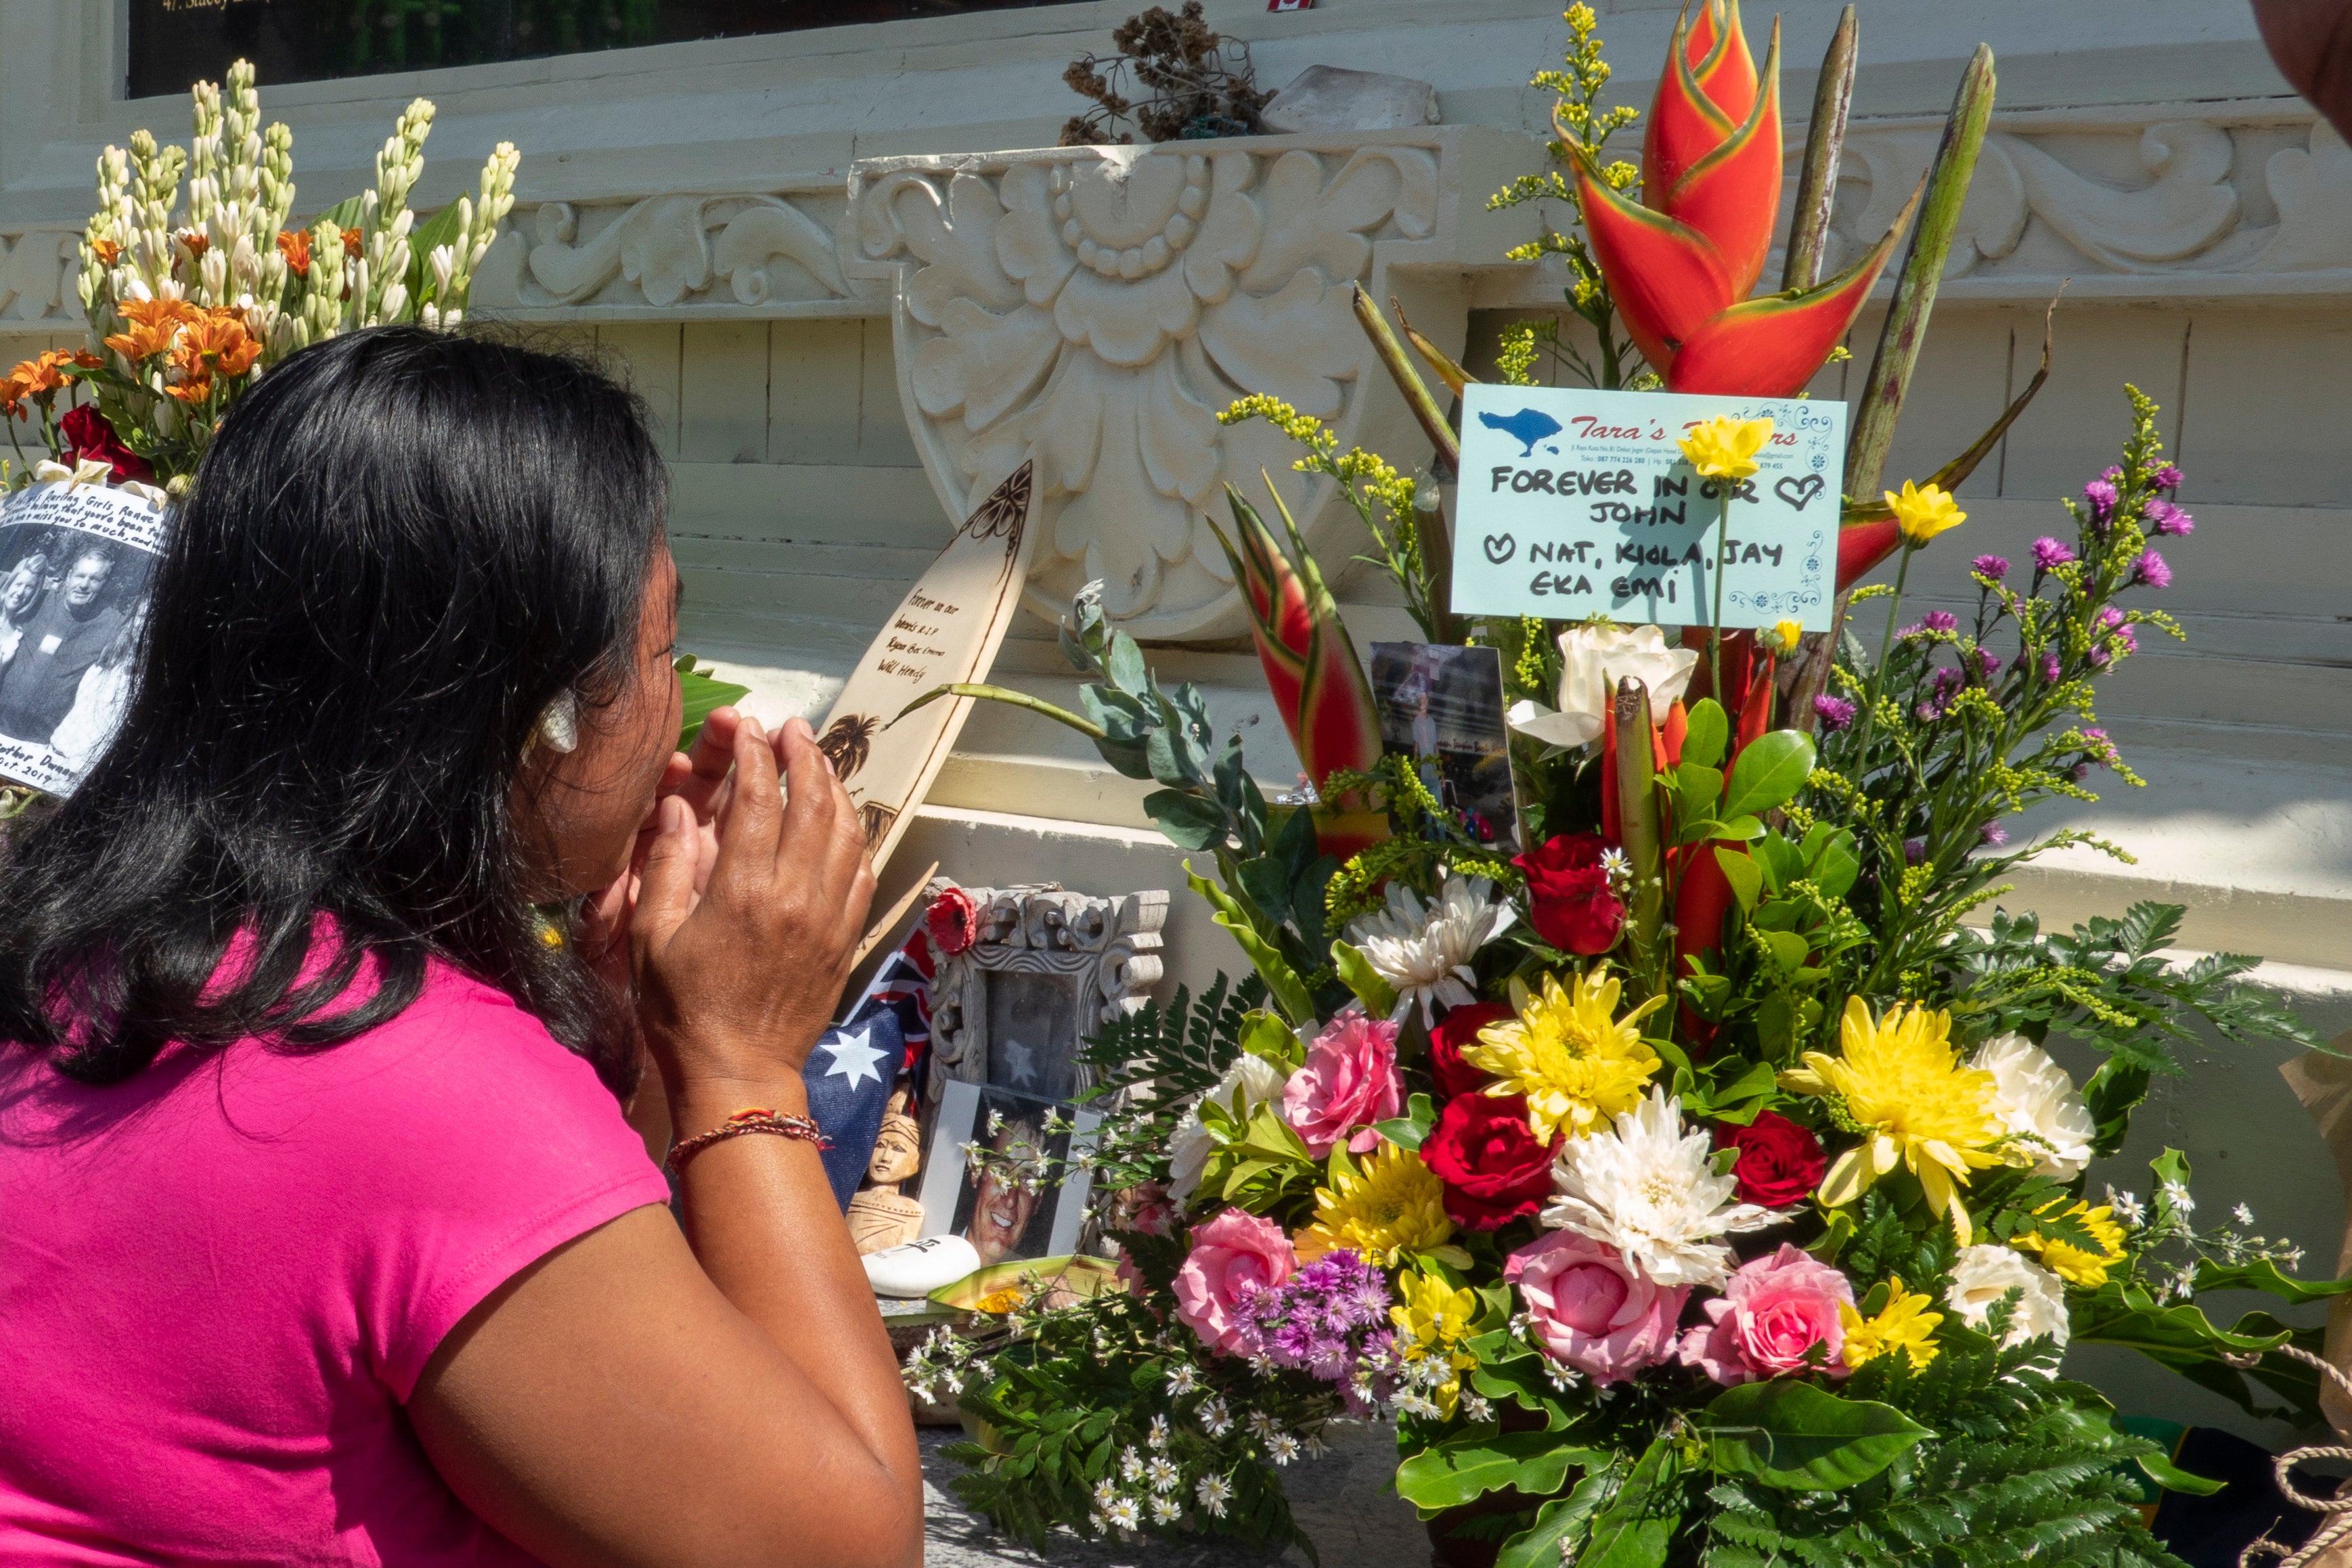 Relatives mourn in front of the Bali bombings memorial on last year’s 17th anniversary of the attack, in Kuta, Bali